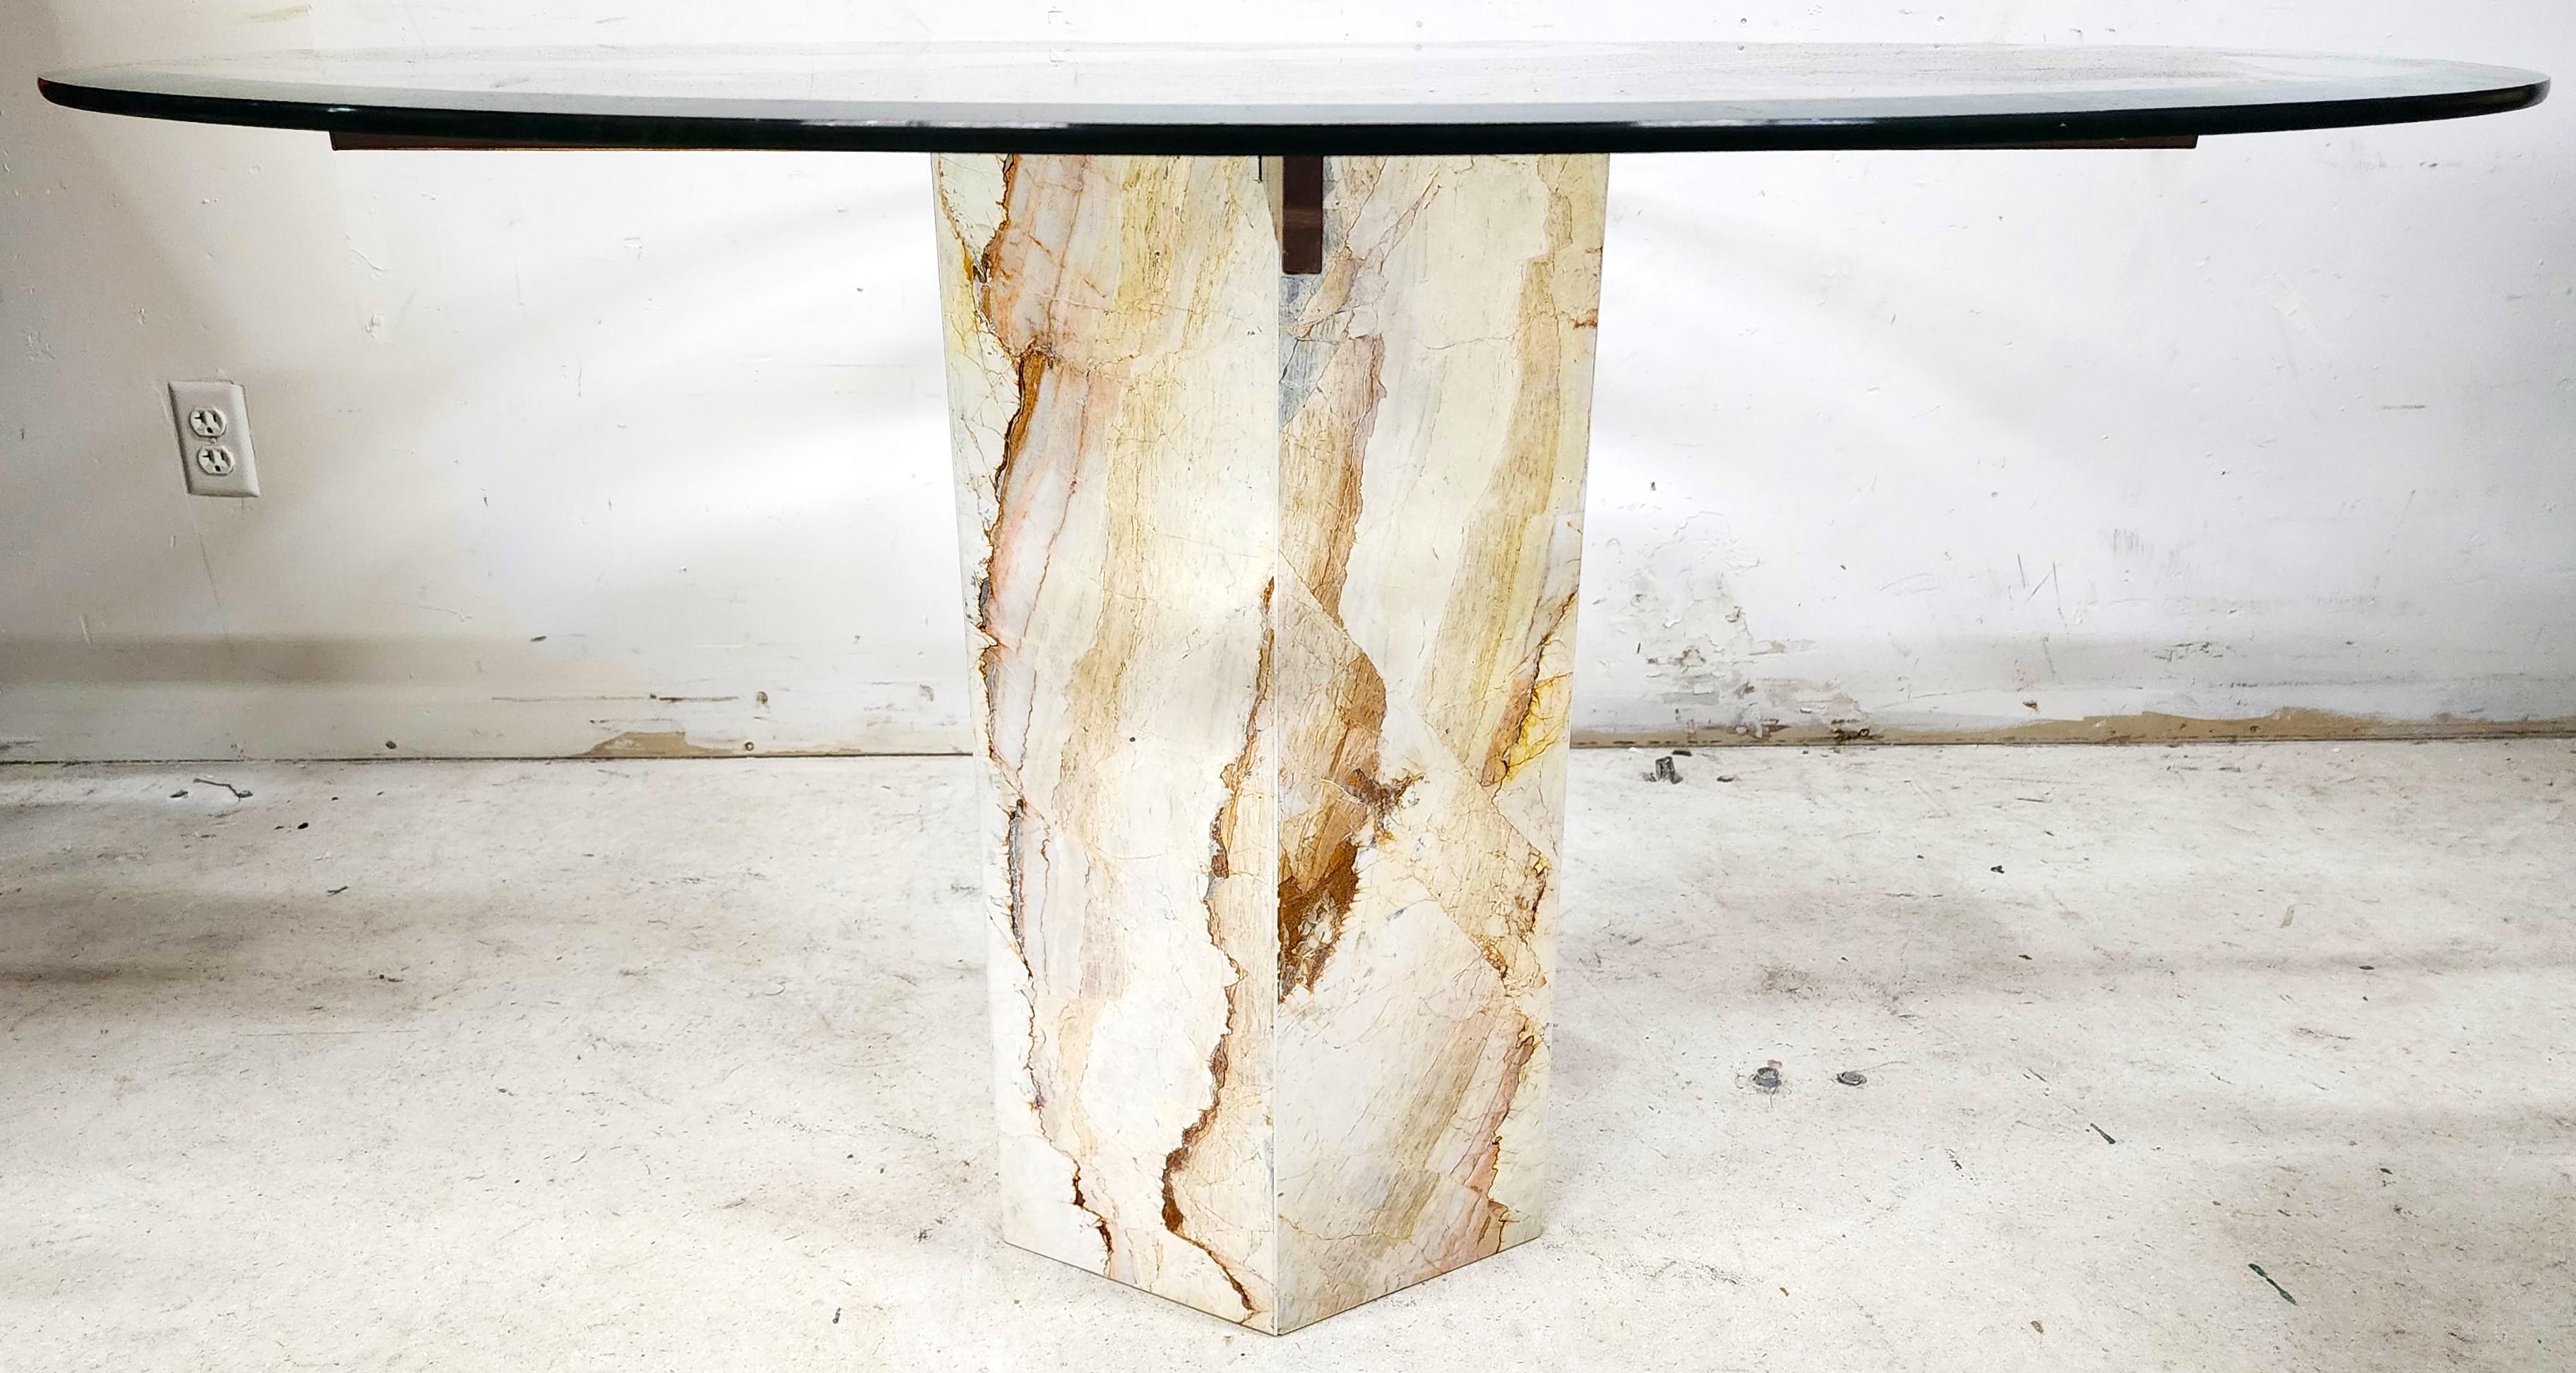 Offering One Of Our Recent Palm Beach Estate fine Furniture Acquisitions Of 
An Italian Marble & Glass Dining Table 
Featuring a fantastic marble base and beveled edge glass top.

Approximate Measurements in Inches
29